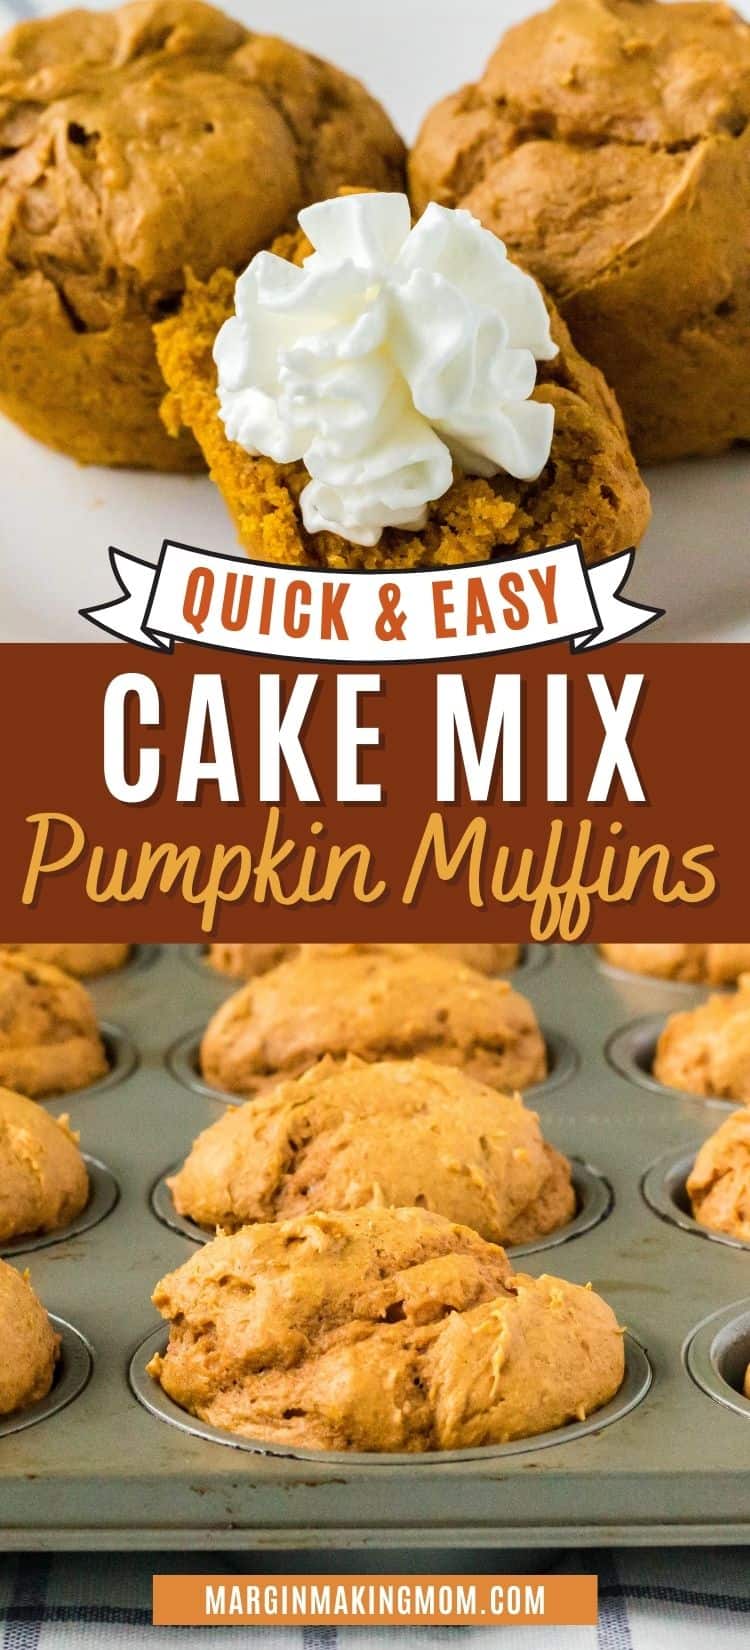 collage image of two photos. The top photo shows a cake mix pumpkin muffin topped with whipped cream. The bottom photo shows muffins still in the pan. An overlay reads, "Quick and Easy Cake Mix pumpkin muffins"